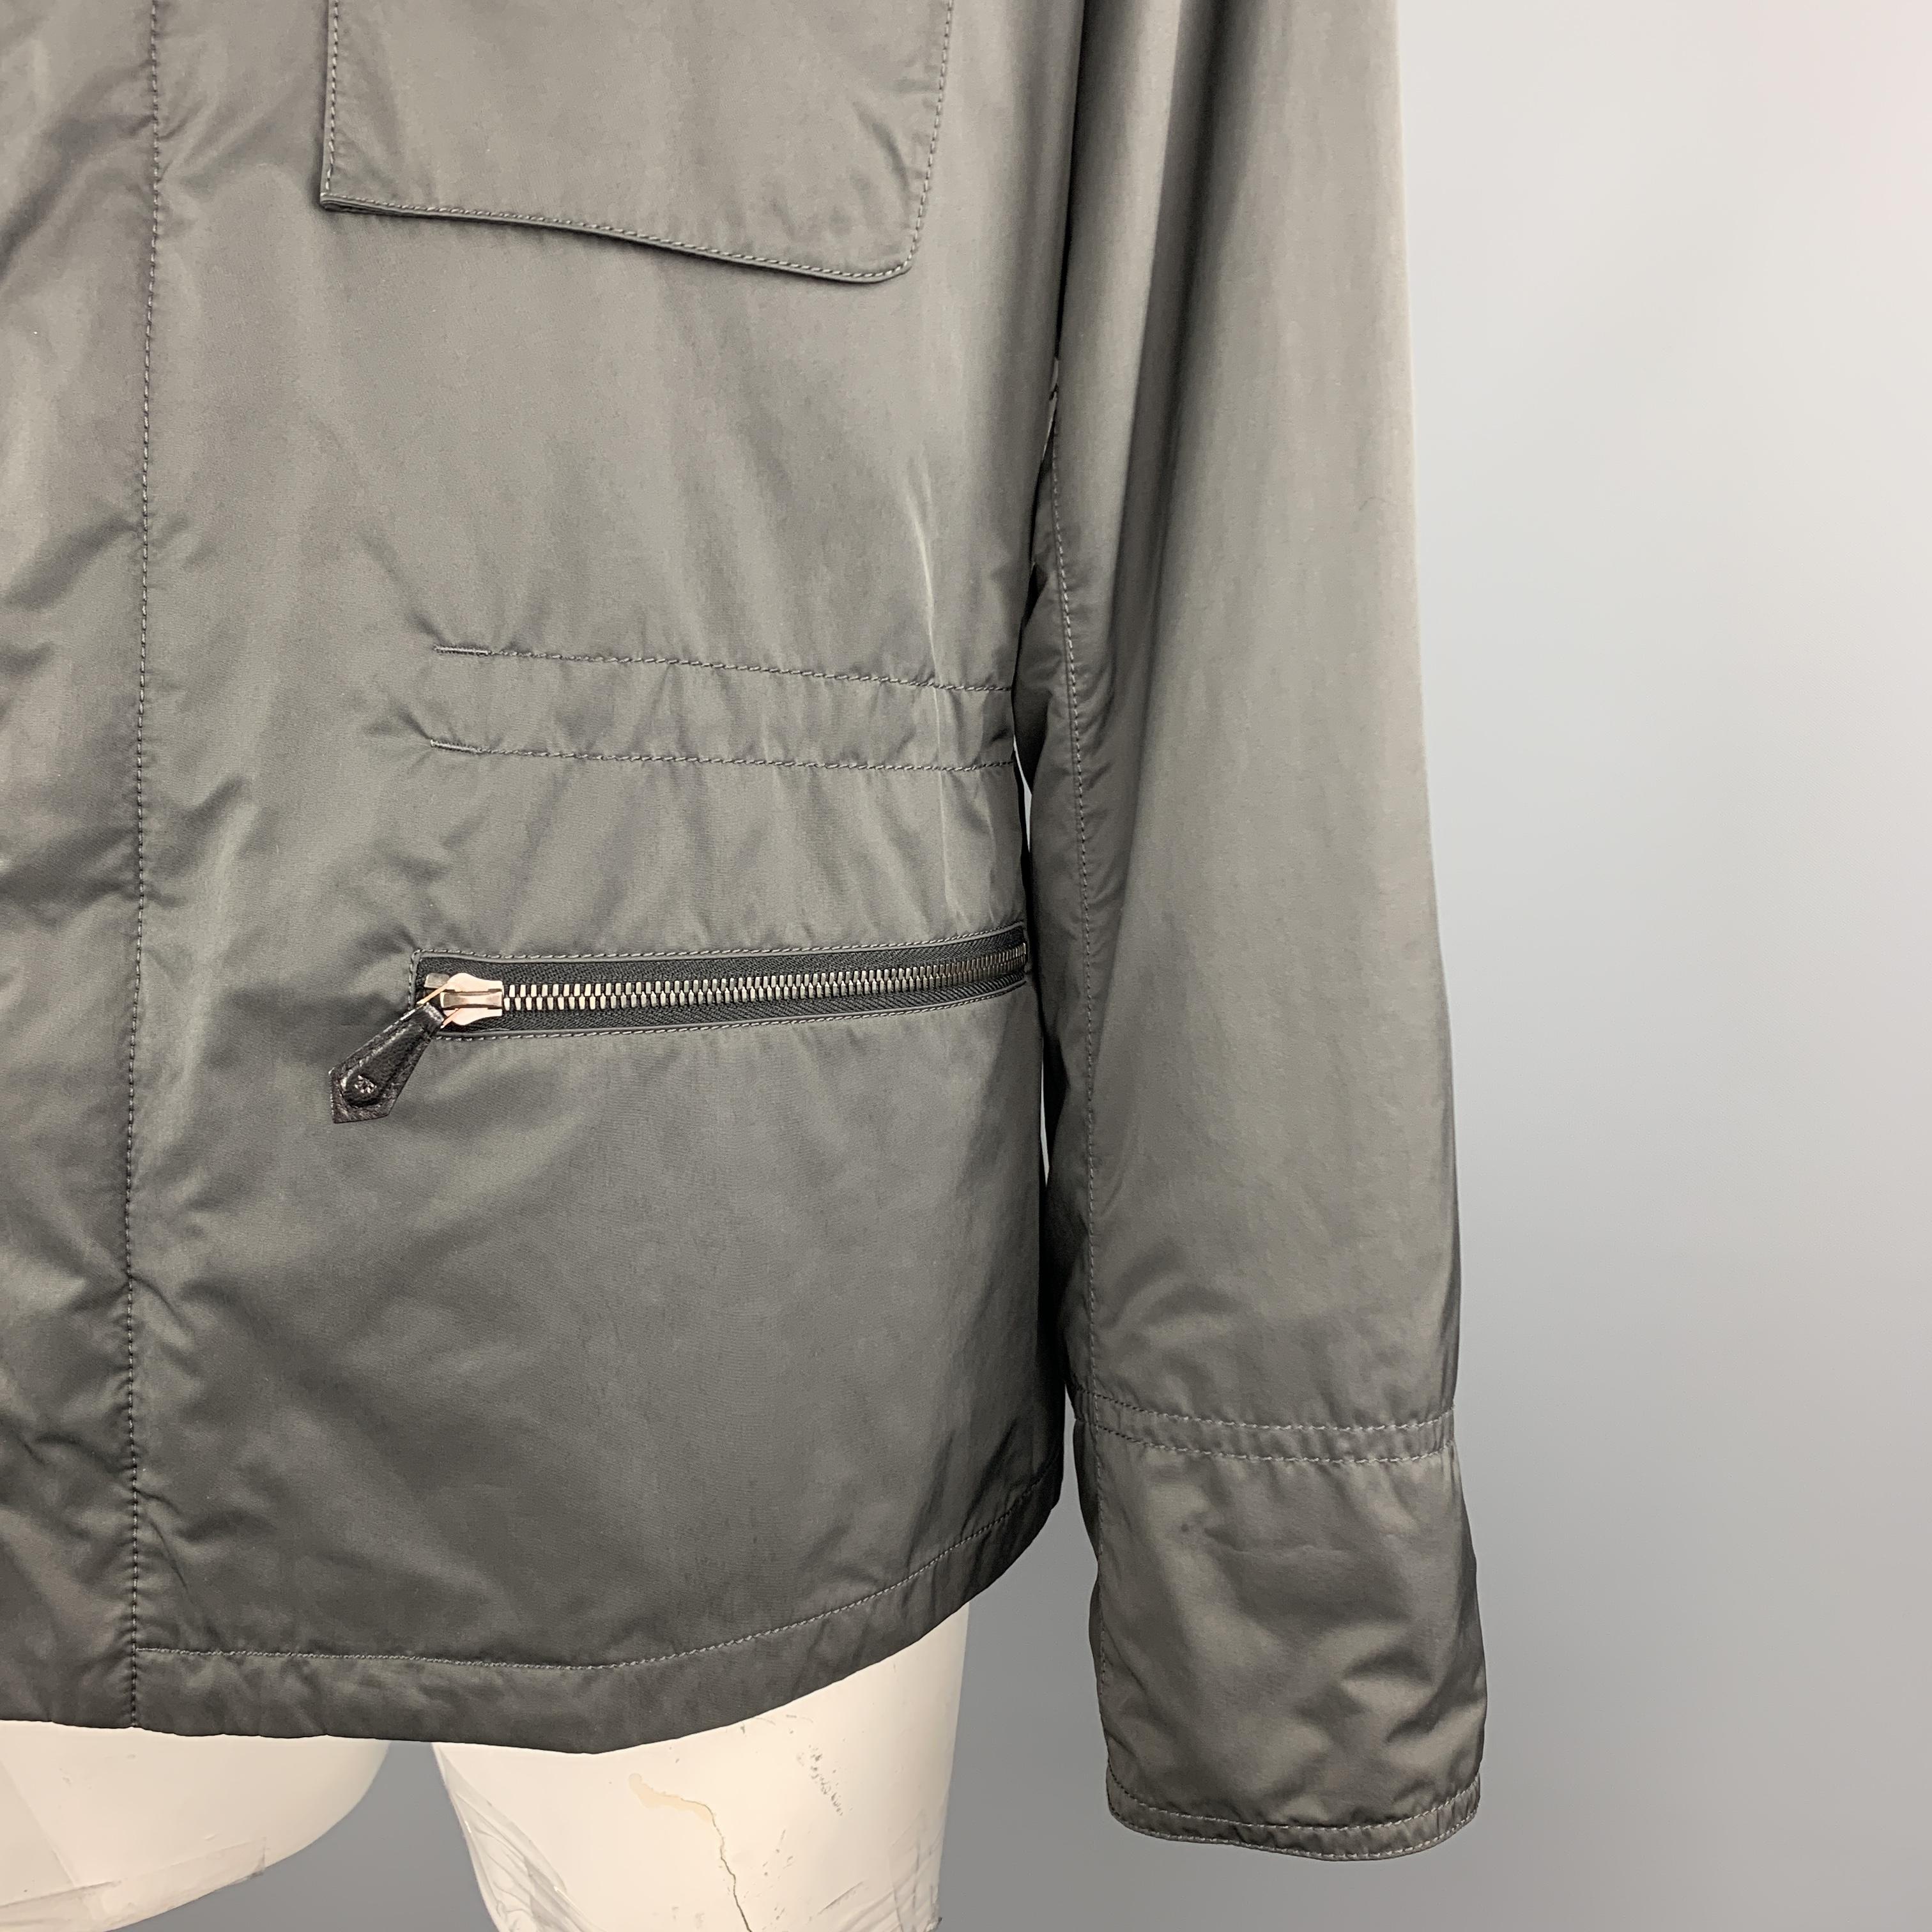 TOM FORD Jacket comes in a gray solid polyester / nylon material, with a high collar, zip and snaps at closure, single breasted, flap and zip pockets, snaps at cuffs, and a inner drawstring at waist. Made in Italy. 

Excellent Pre-Owned